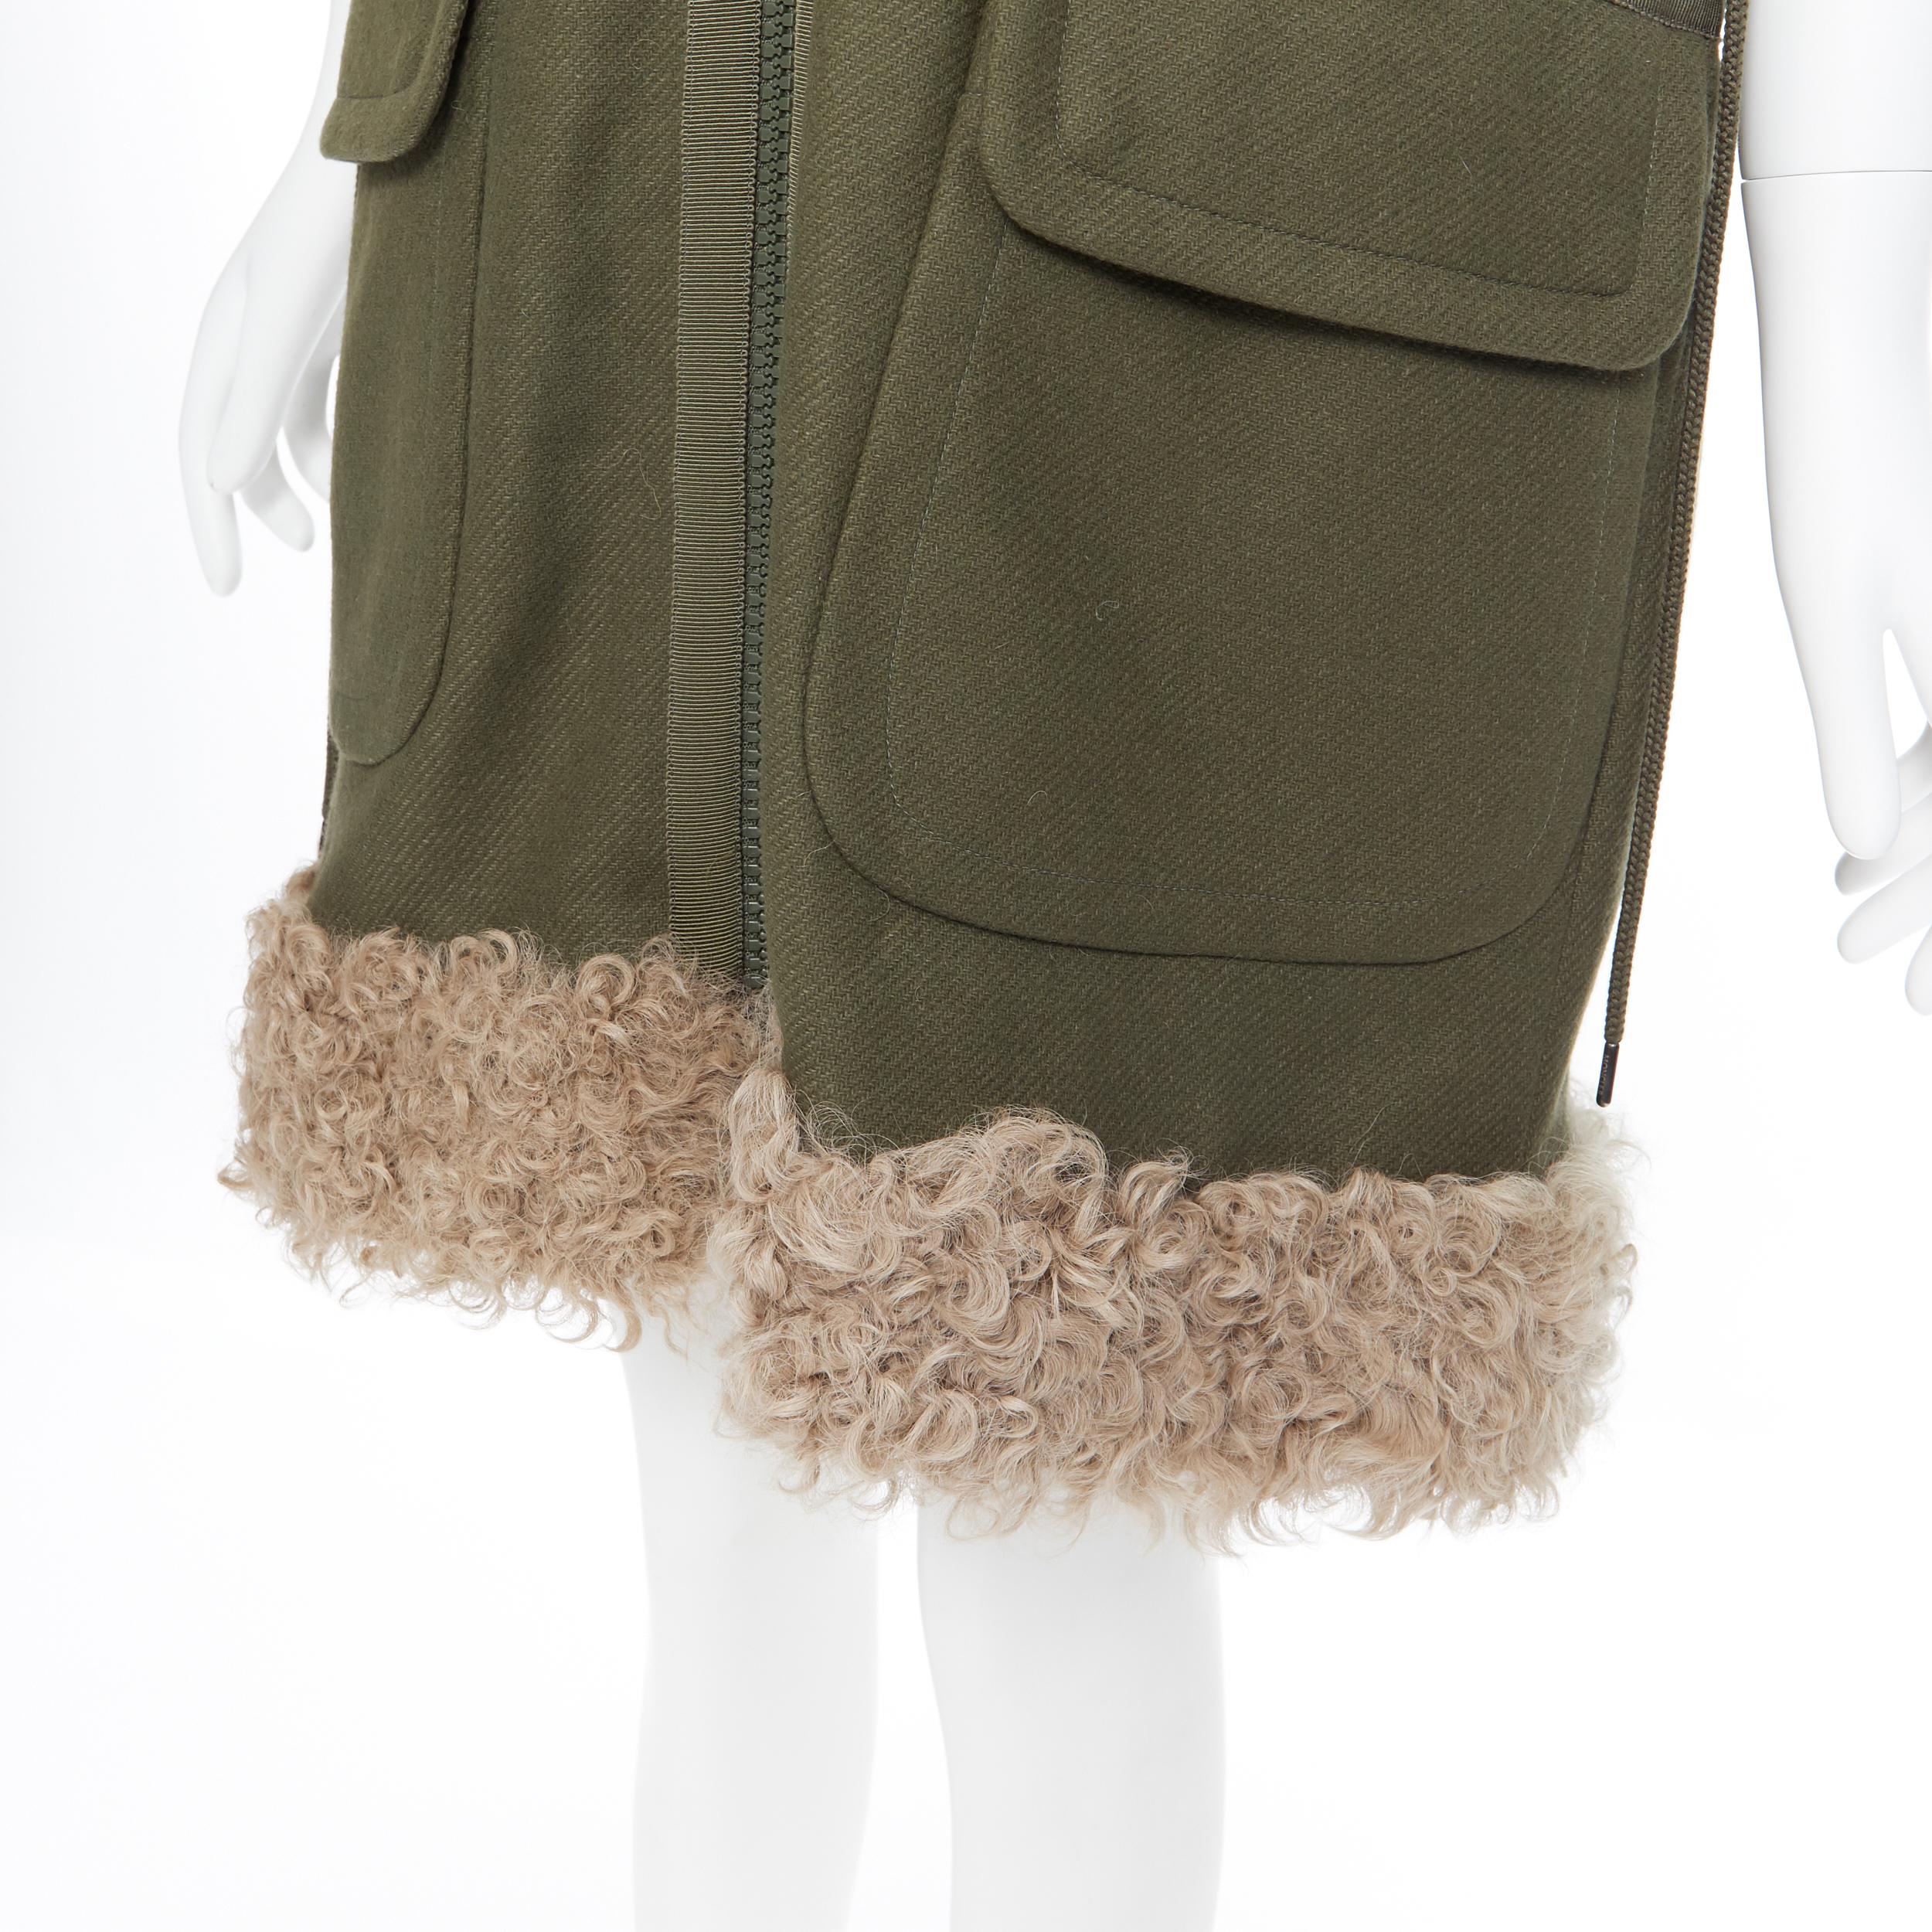 MONCLER Anne Giubbotto military green down padded shearling trim hooded vest S
Brand: Moncler
Model Name / Style: Down vest
Material: Nylon
Color: Green
Pattern: Solid
Closure: Zip
Extra Detail: Shearling and fur trimming at collar and at hem.